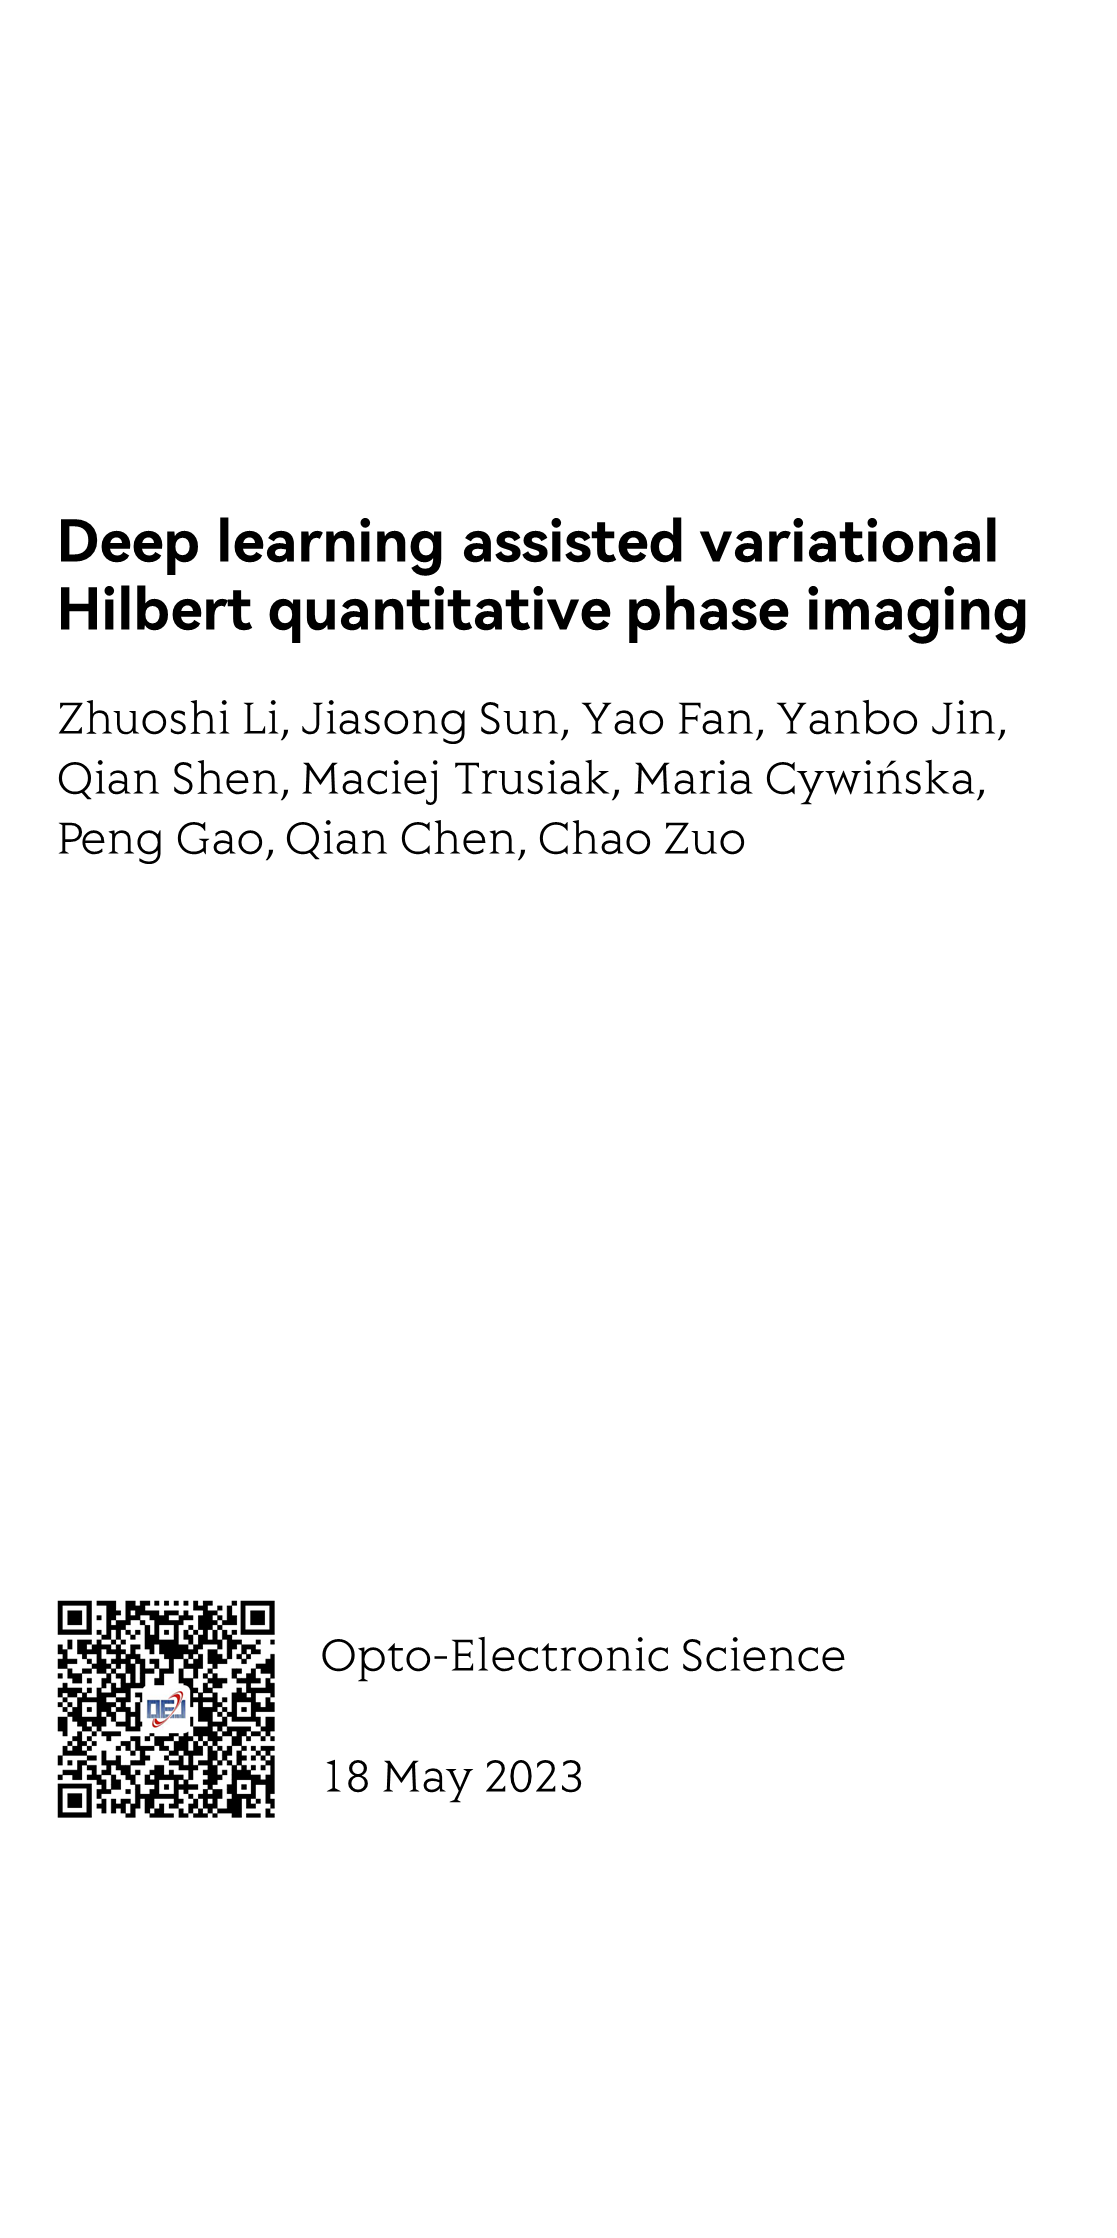 Deep learning assisted variational Hilbert quantitative phase imaging_1